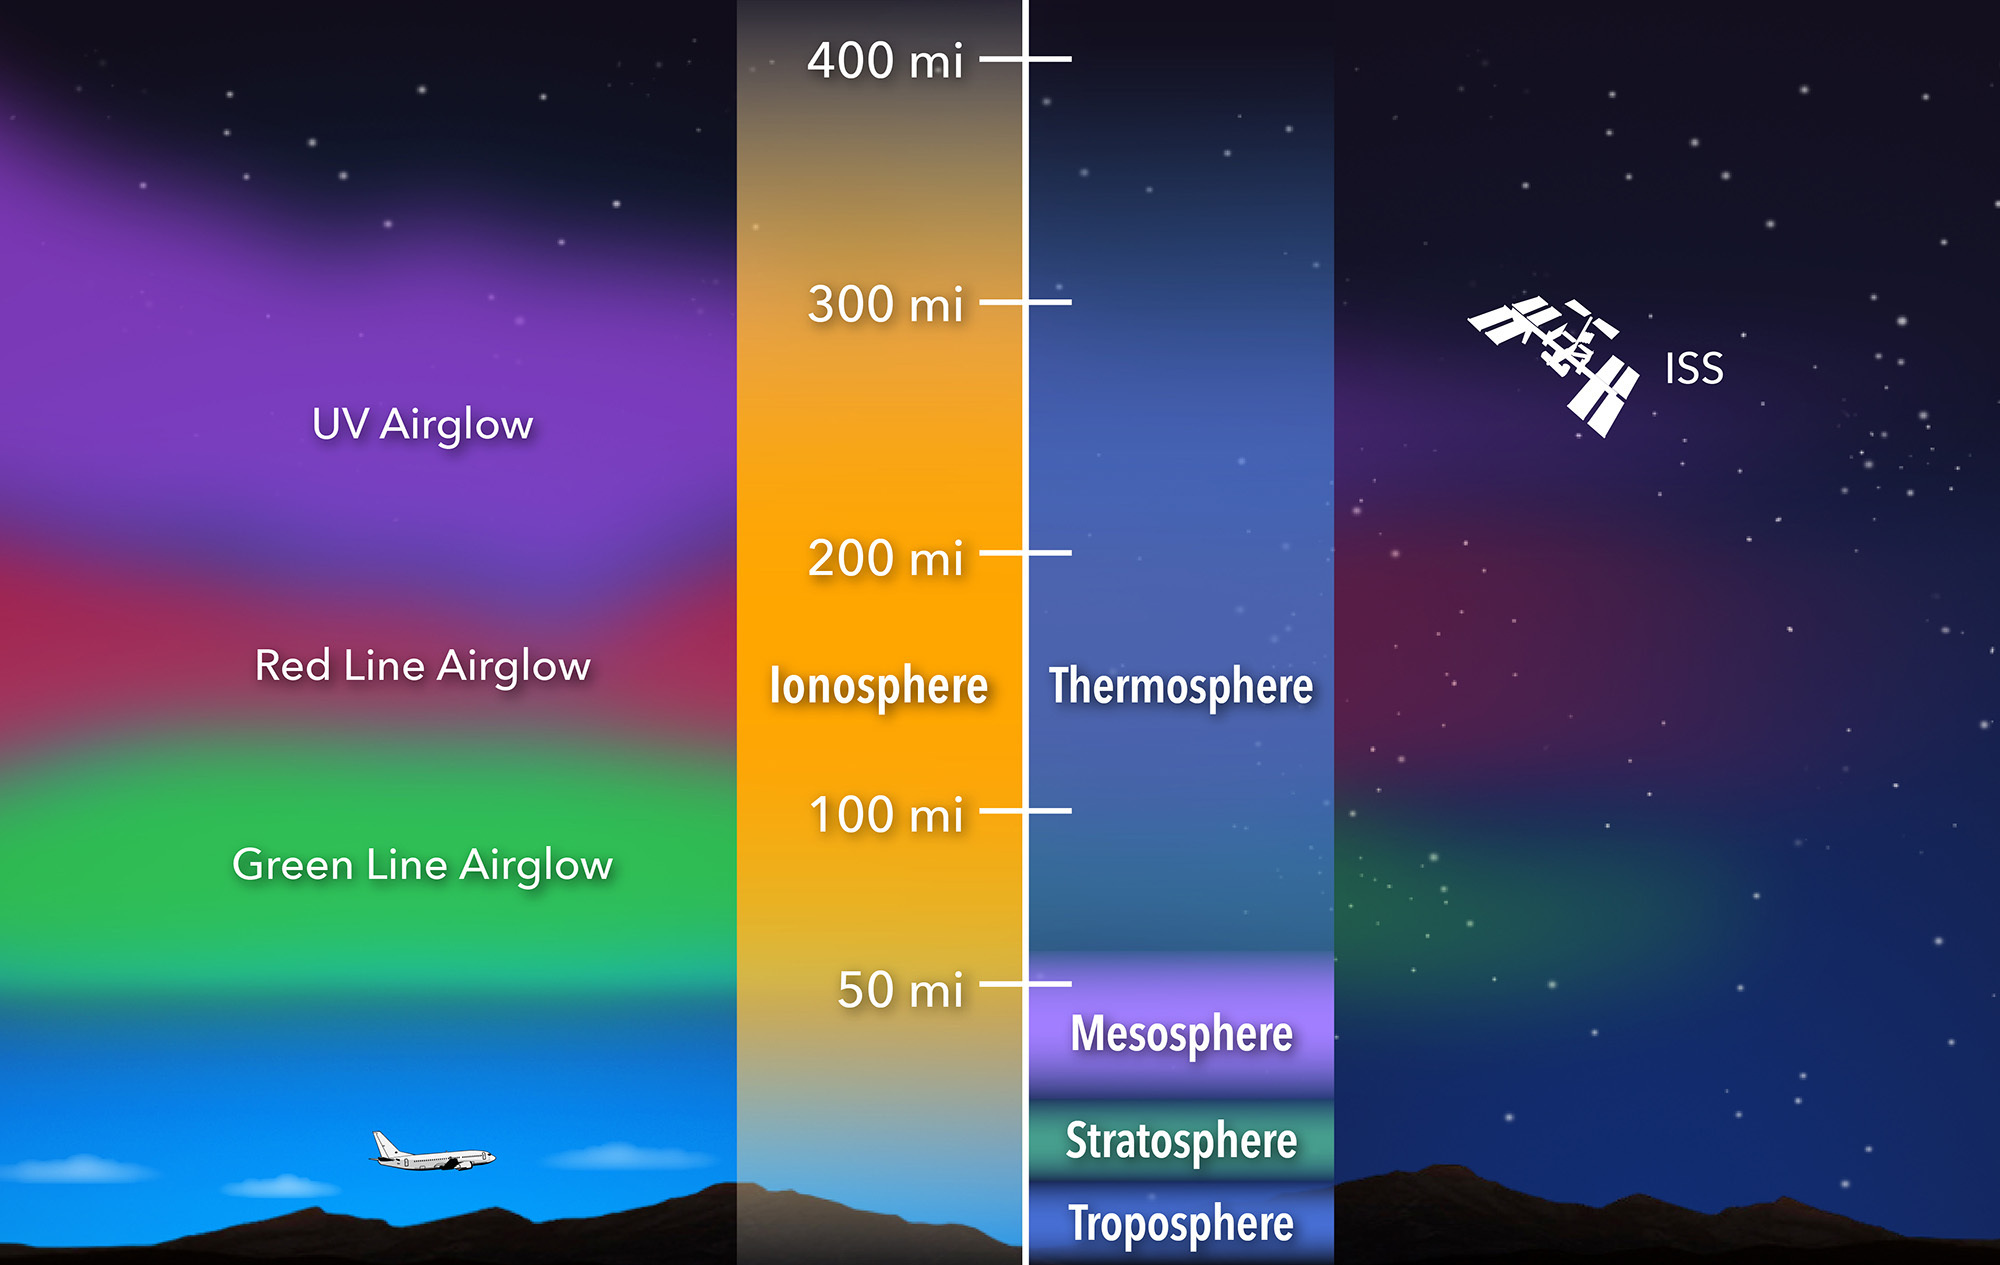 A graphic shows the layers of the atmosphere and associated airglow layers from 50 to 400 miles up. The ISS is at 300 miles.